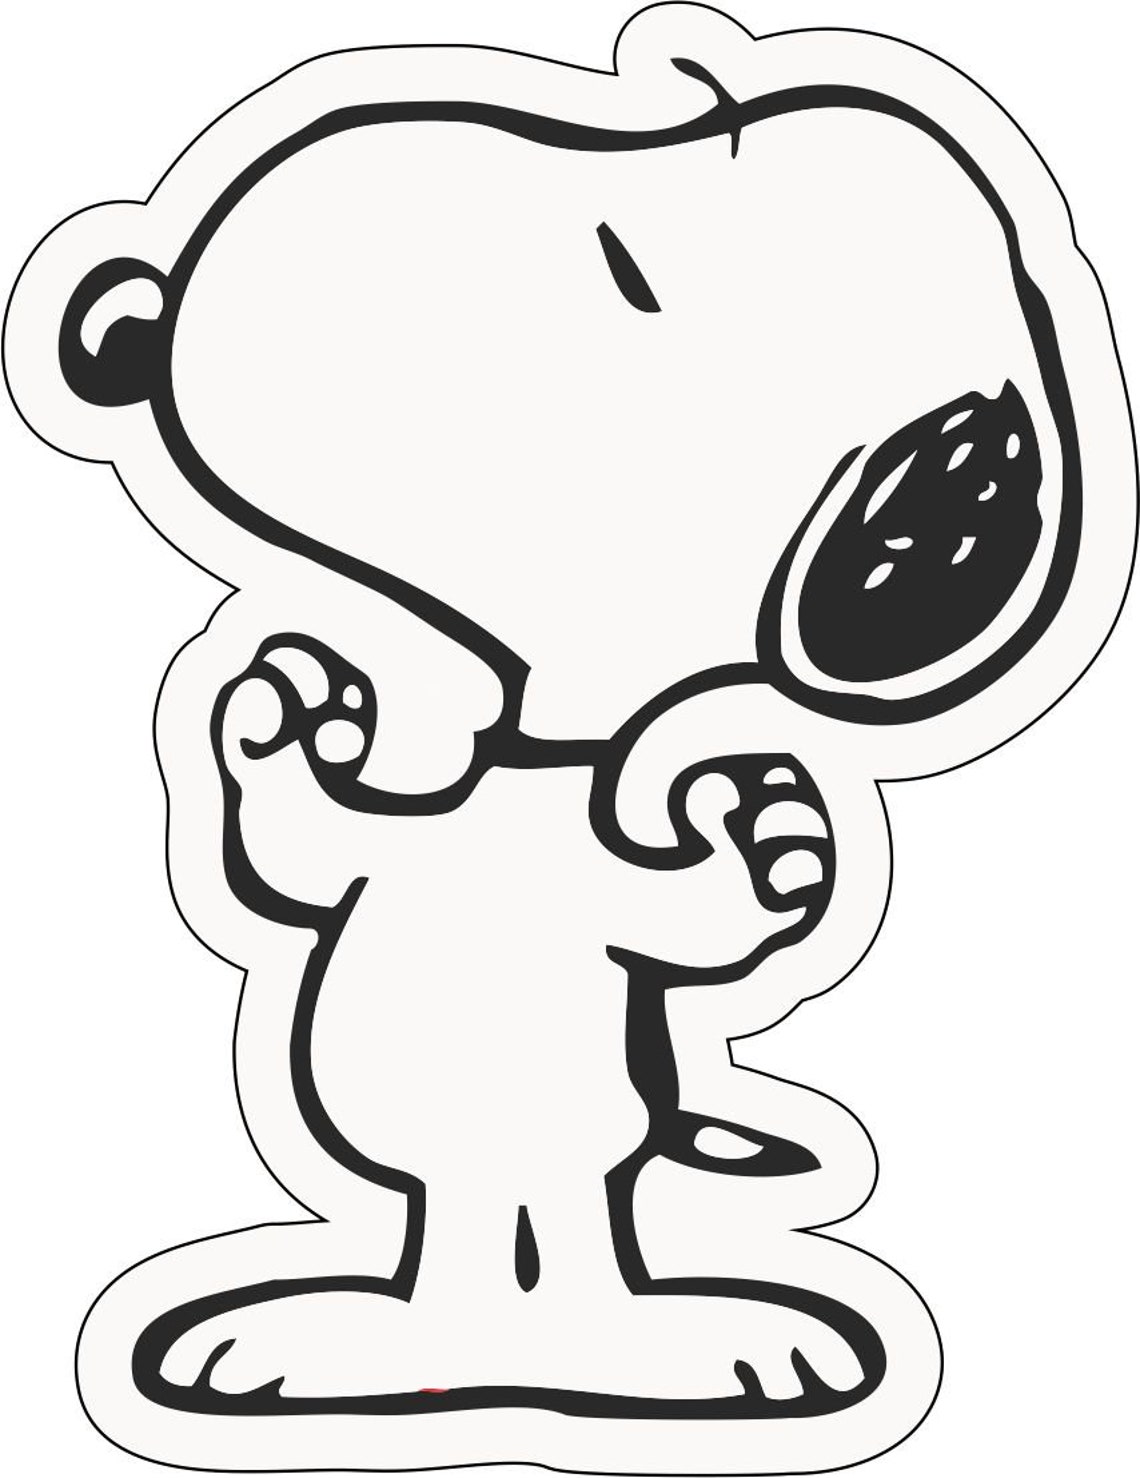 snoopy-cut-out-template